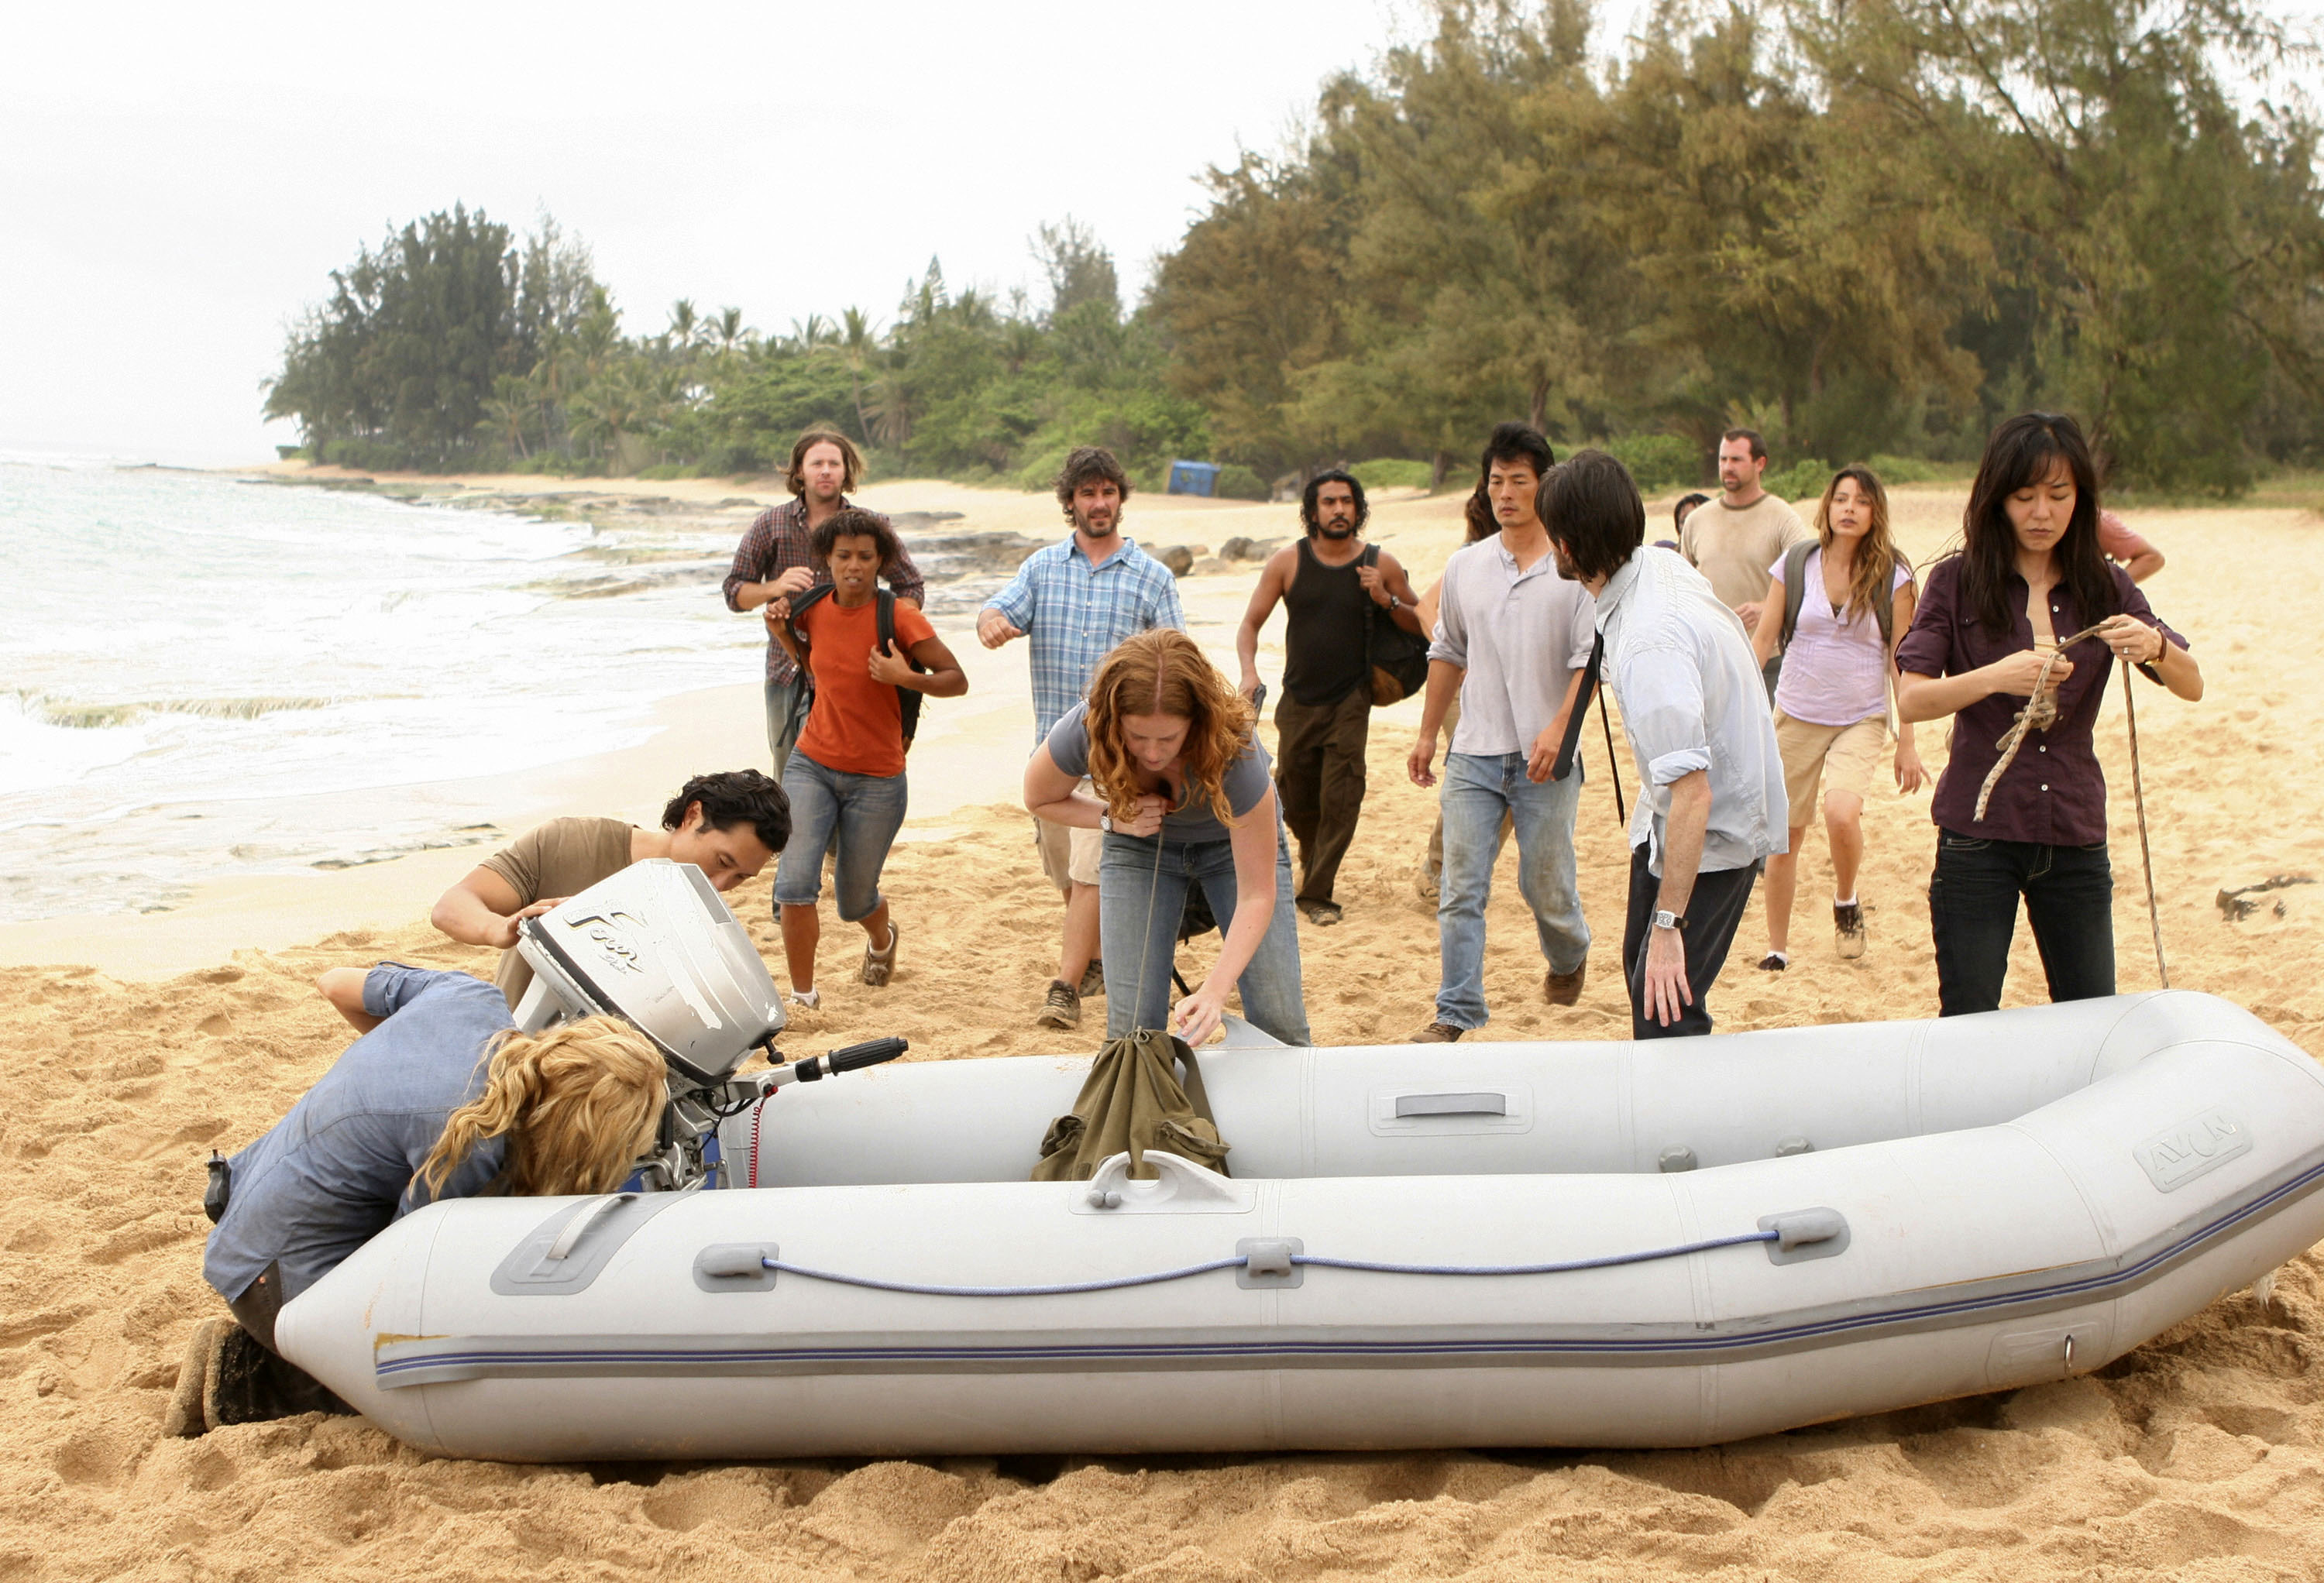 the cast runs towards an inflatable boat